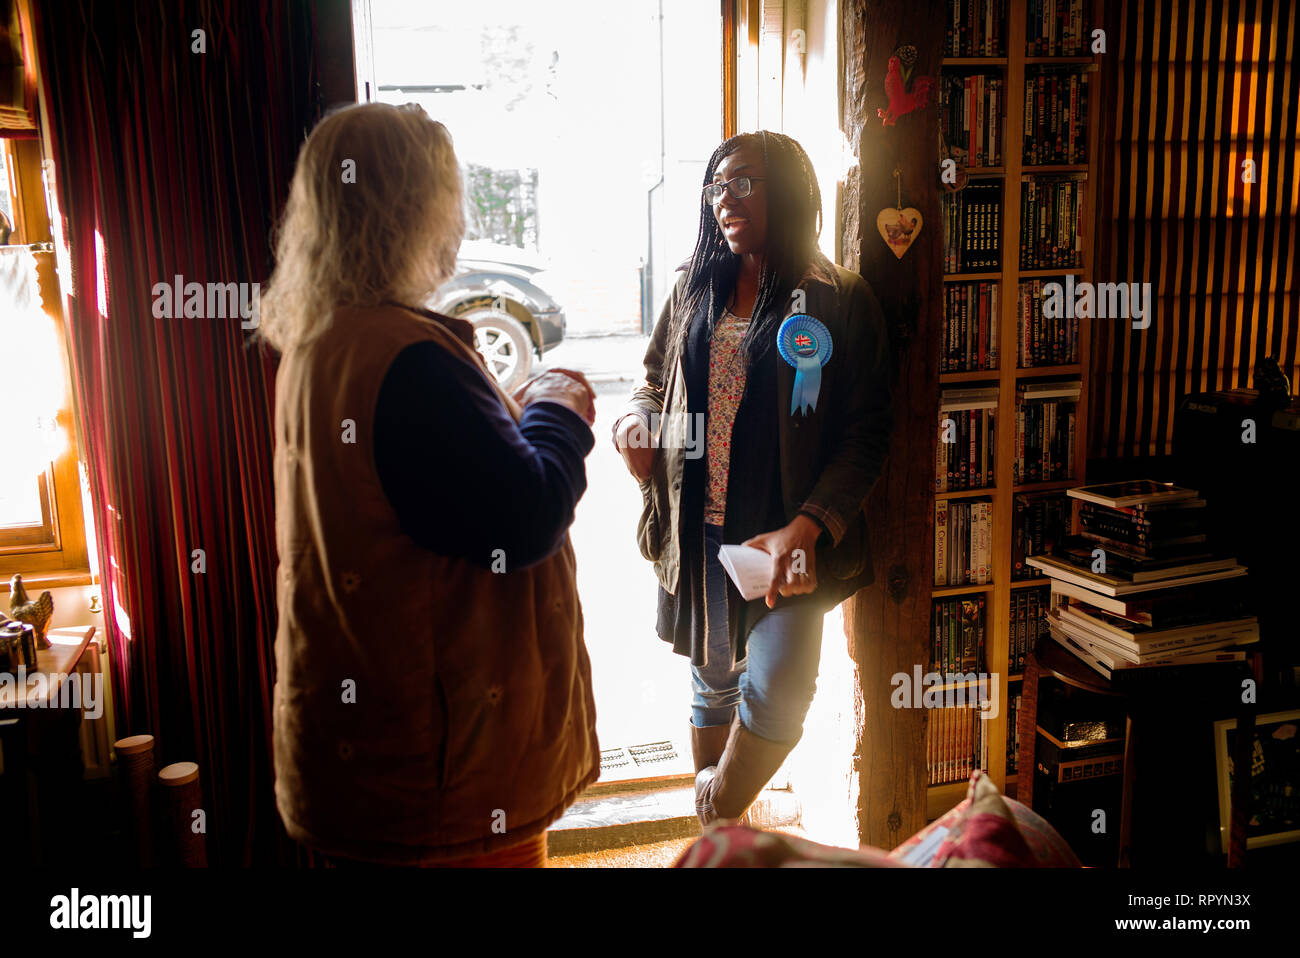 Thaxted, Essex, England. 23rd February 2019. Kemi Badenoch Conservative MP for Saffron Walden Essex UK campaigning for two local council candidates in the Uttlesford District Council ( UDC ) election to be held on 2 May 2019. She is seen here talking to local resident Nicola Bertoya about issues of concern such as speeding motorists in the area.  Olukemi Olufunto Badenoch (née Adegoke; born January 1980)is a British Conservative politician and Member of Parliament for Saffron Walden. Adegoke was born in Wimbledon, London to parents of Nigerian origin. Credit: BRIAN HARRIS/Alamy Live News Stock Photo